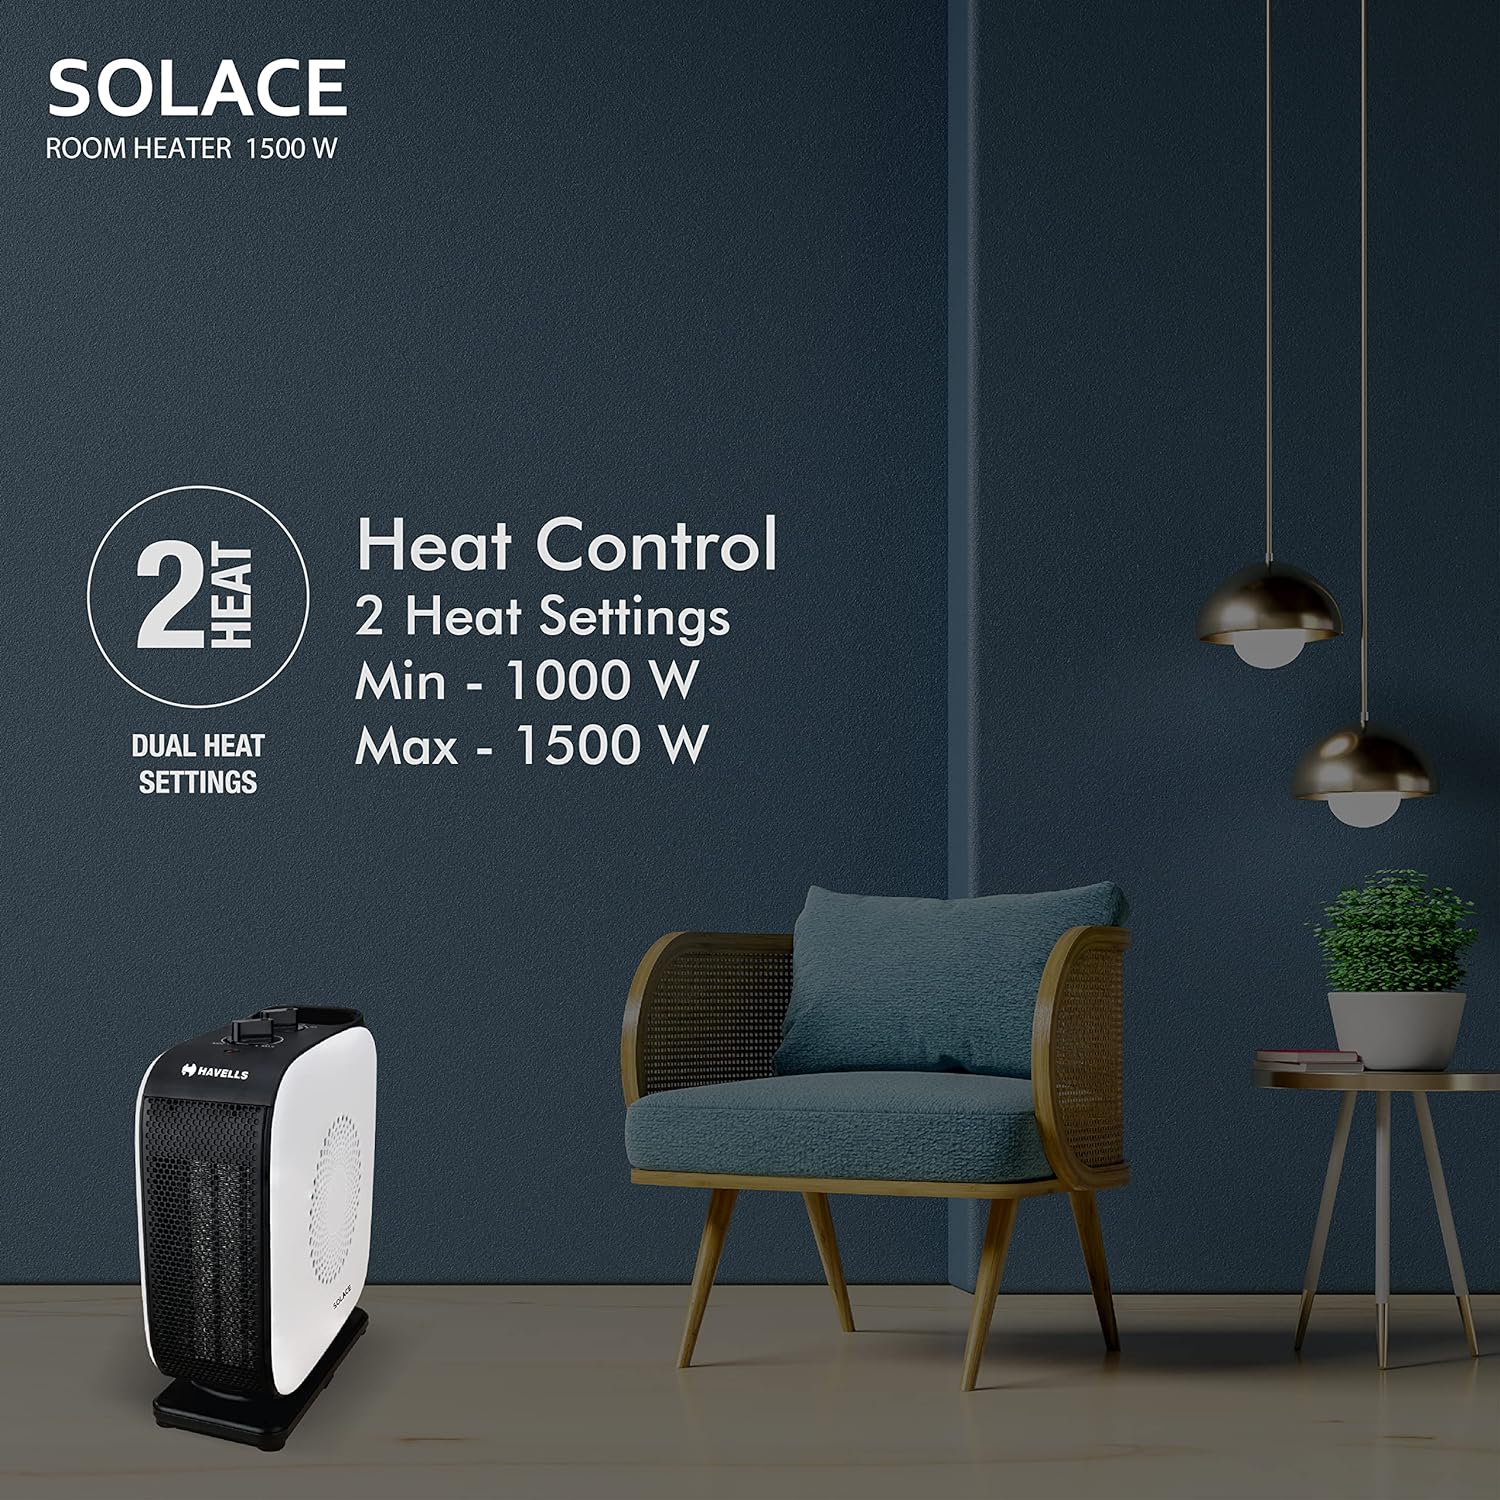 Efficient Havells Solace 1500 Watt Room Heater In White & Black With Ptc Ceramic Heating 2